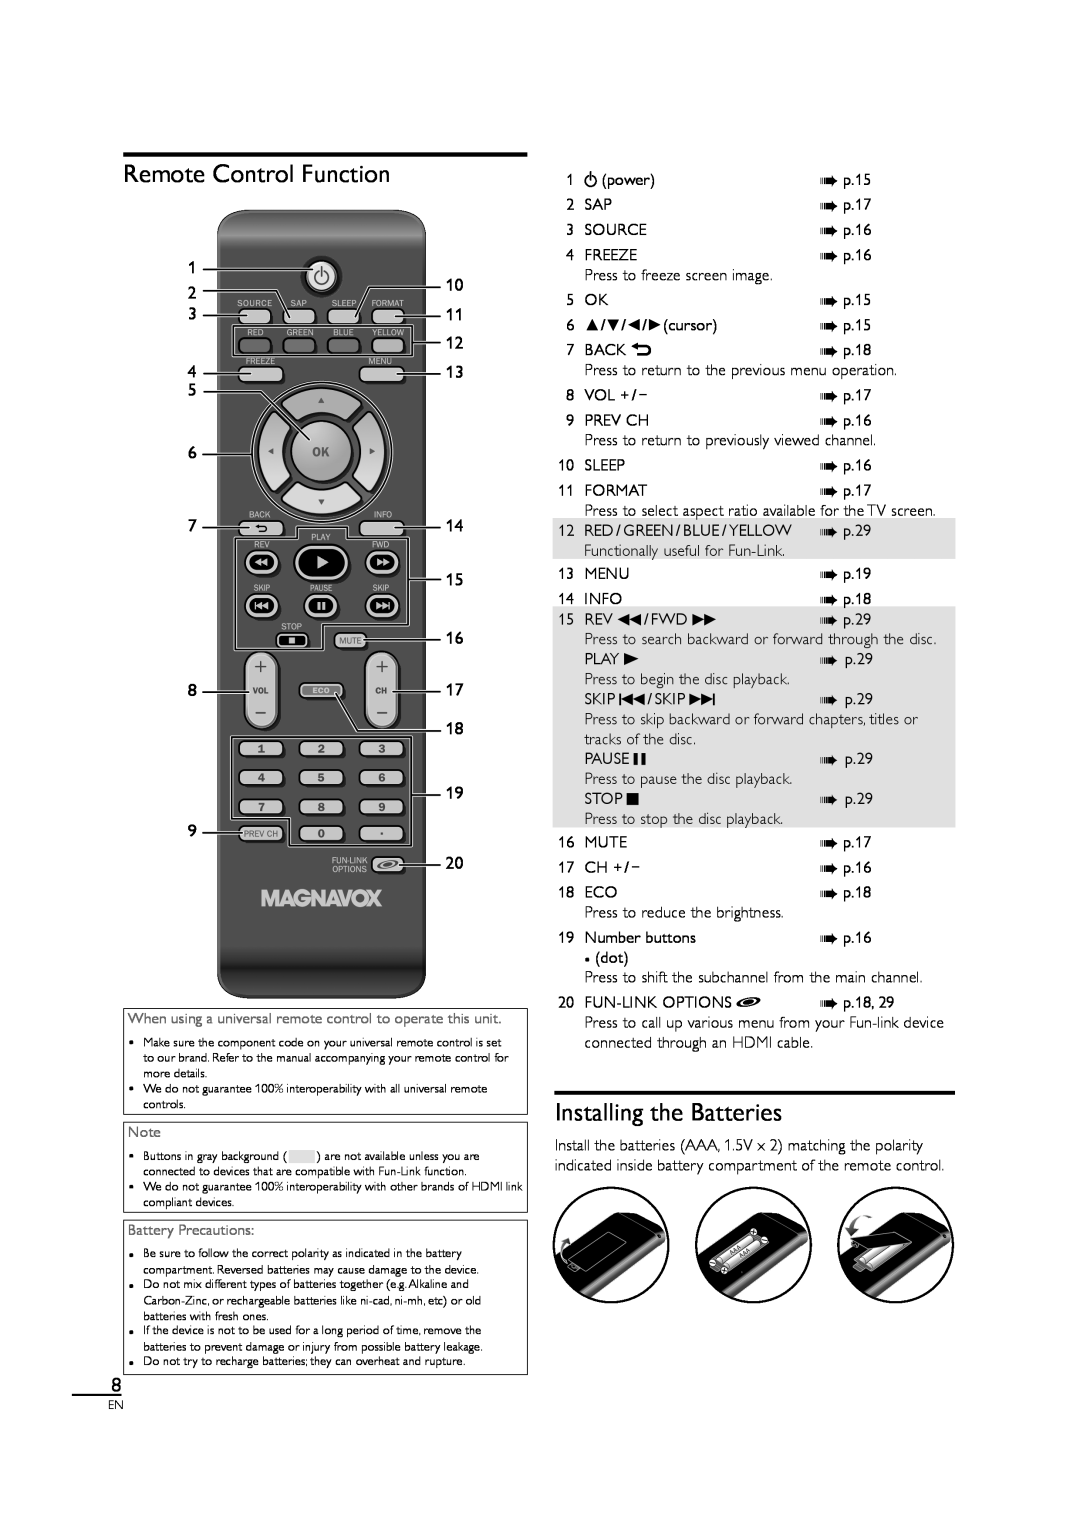 Magnavox 40MF430B owner manual Remote Control Function, Installing the Batteries, Press to freeze screen image, Skip 